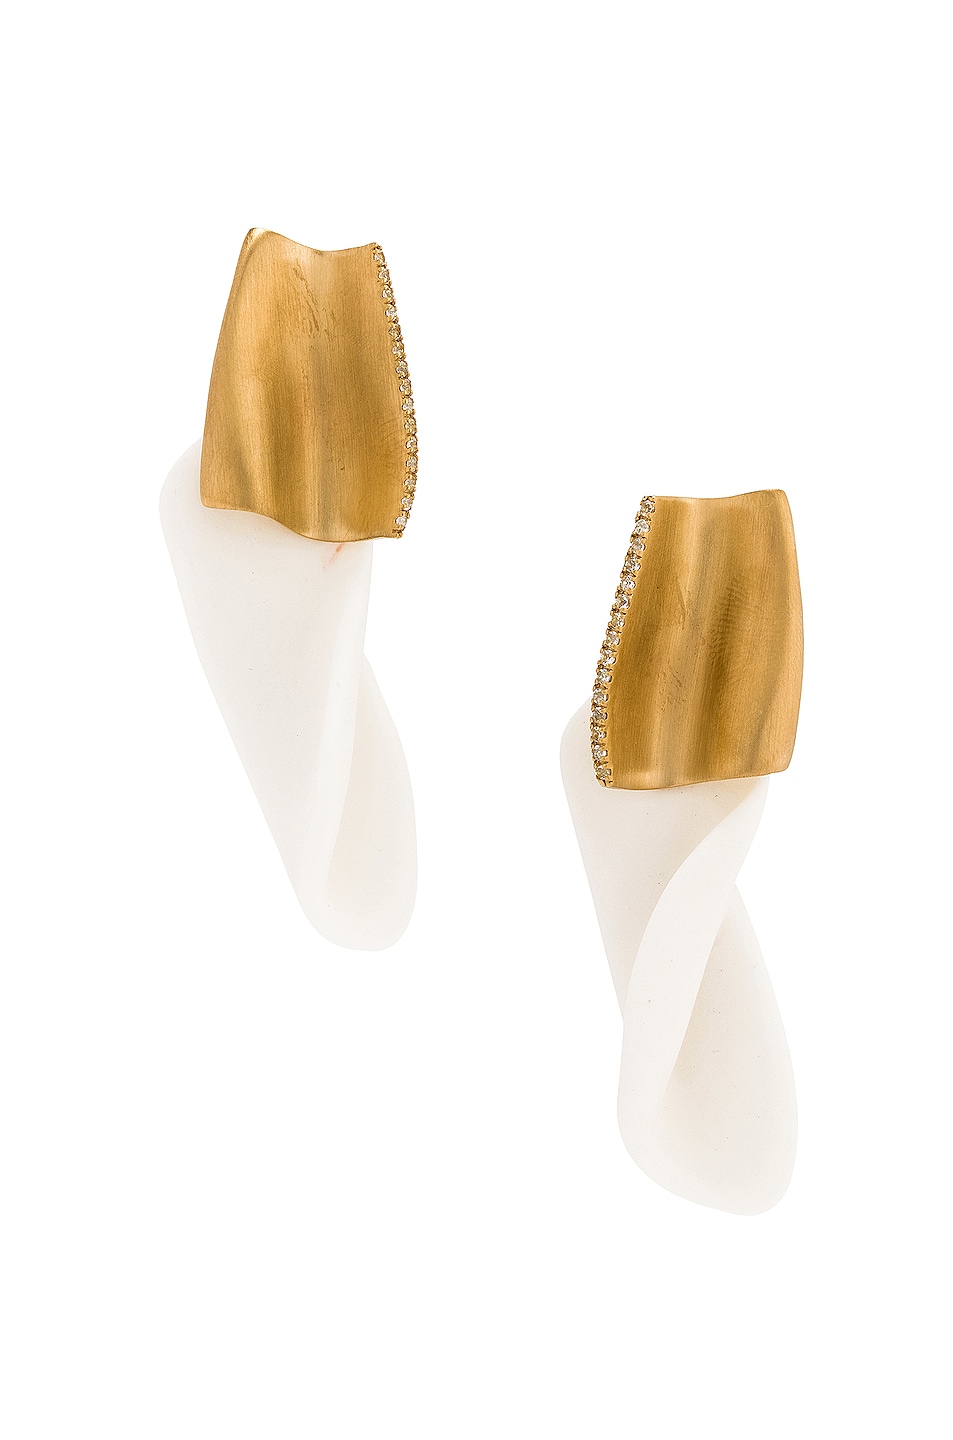 Image 1 of Completedworks Angry Intellectuals Earrings in Gold & White Topaz